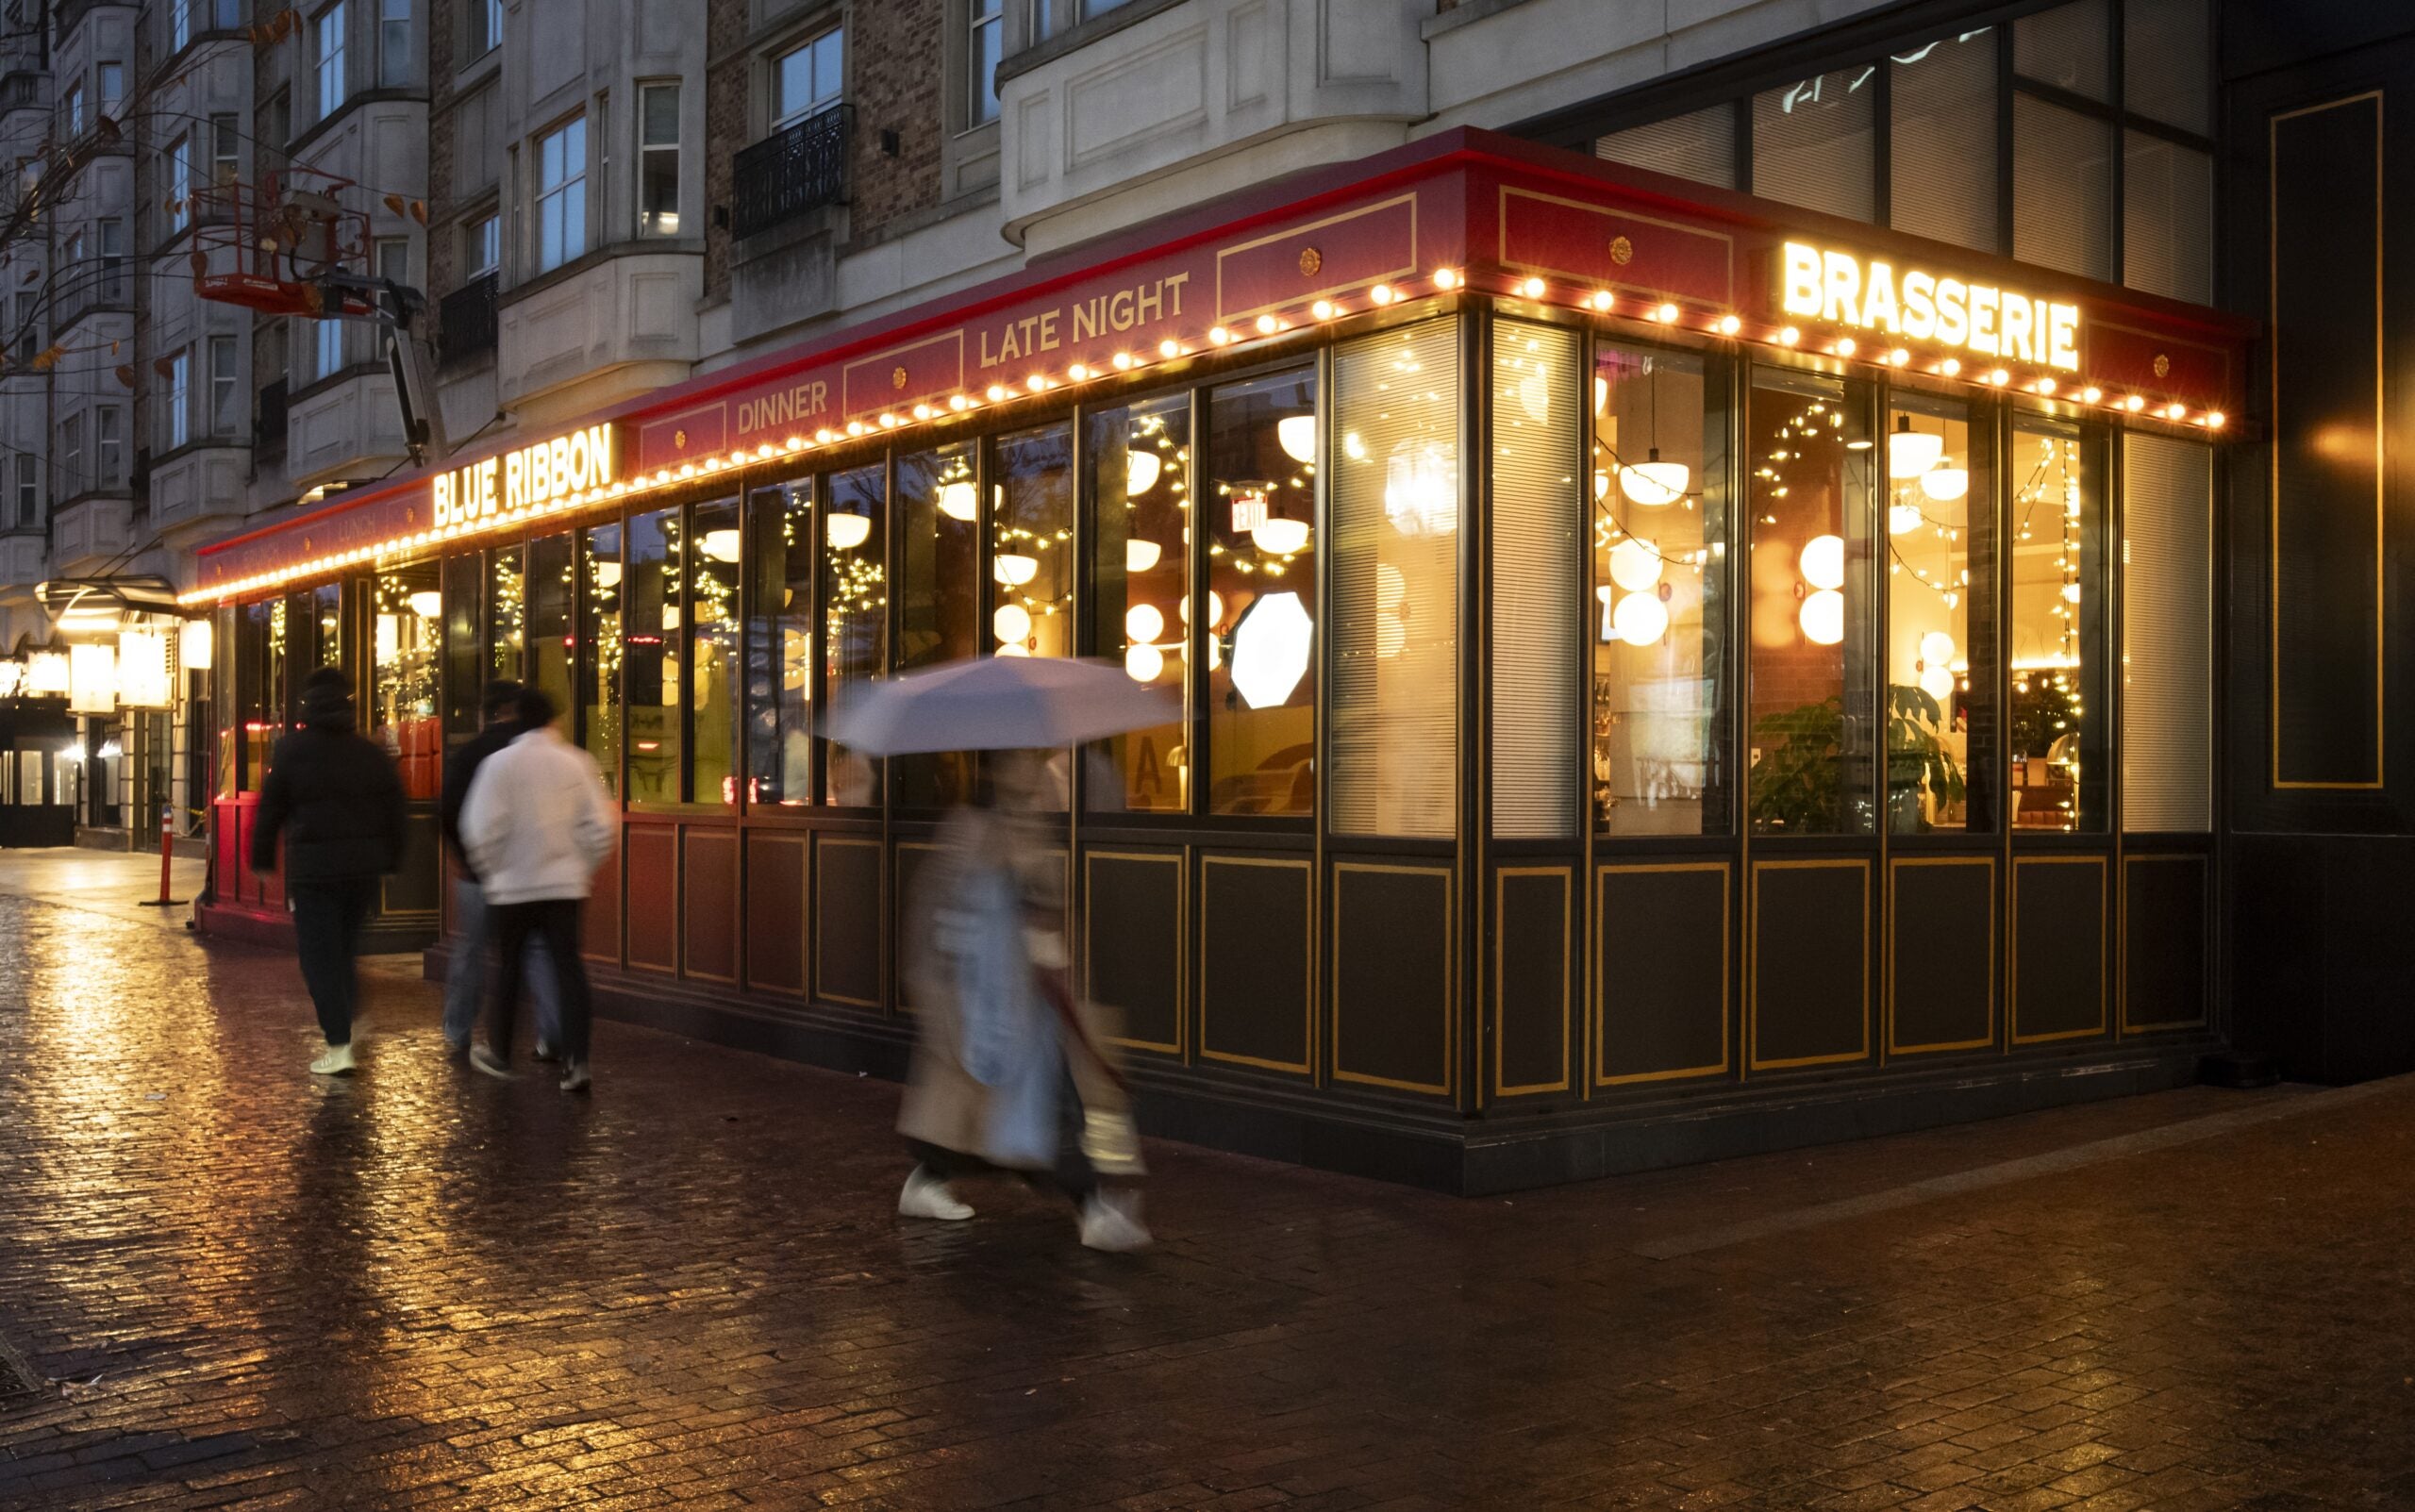 Blue Ribbon Brasserie will open in Kenmore Square this fall